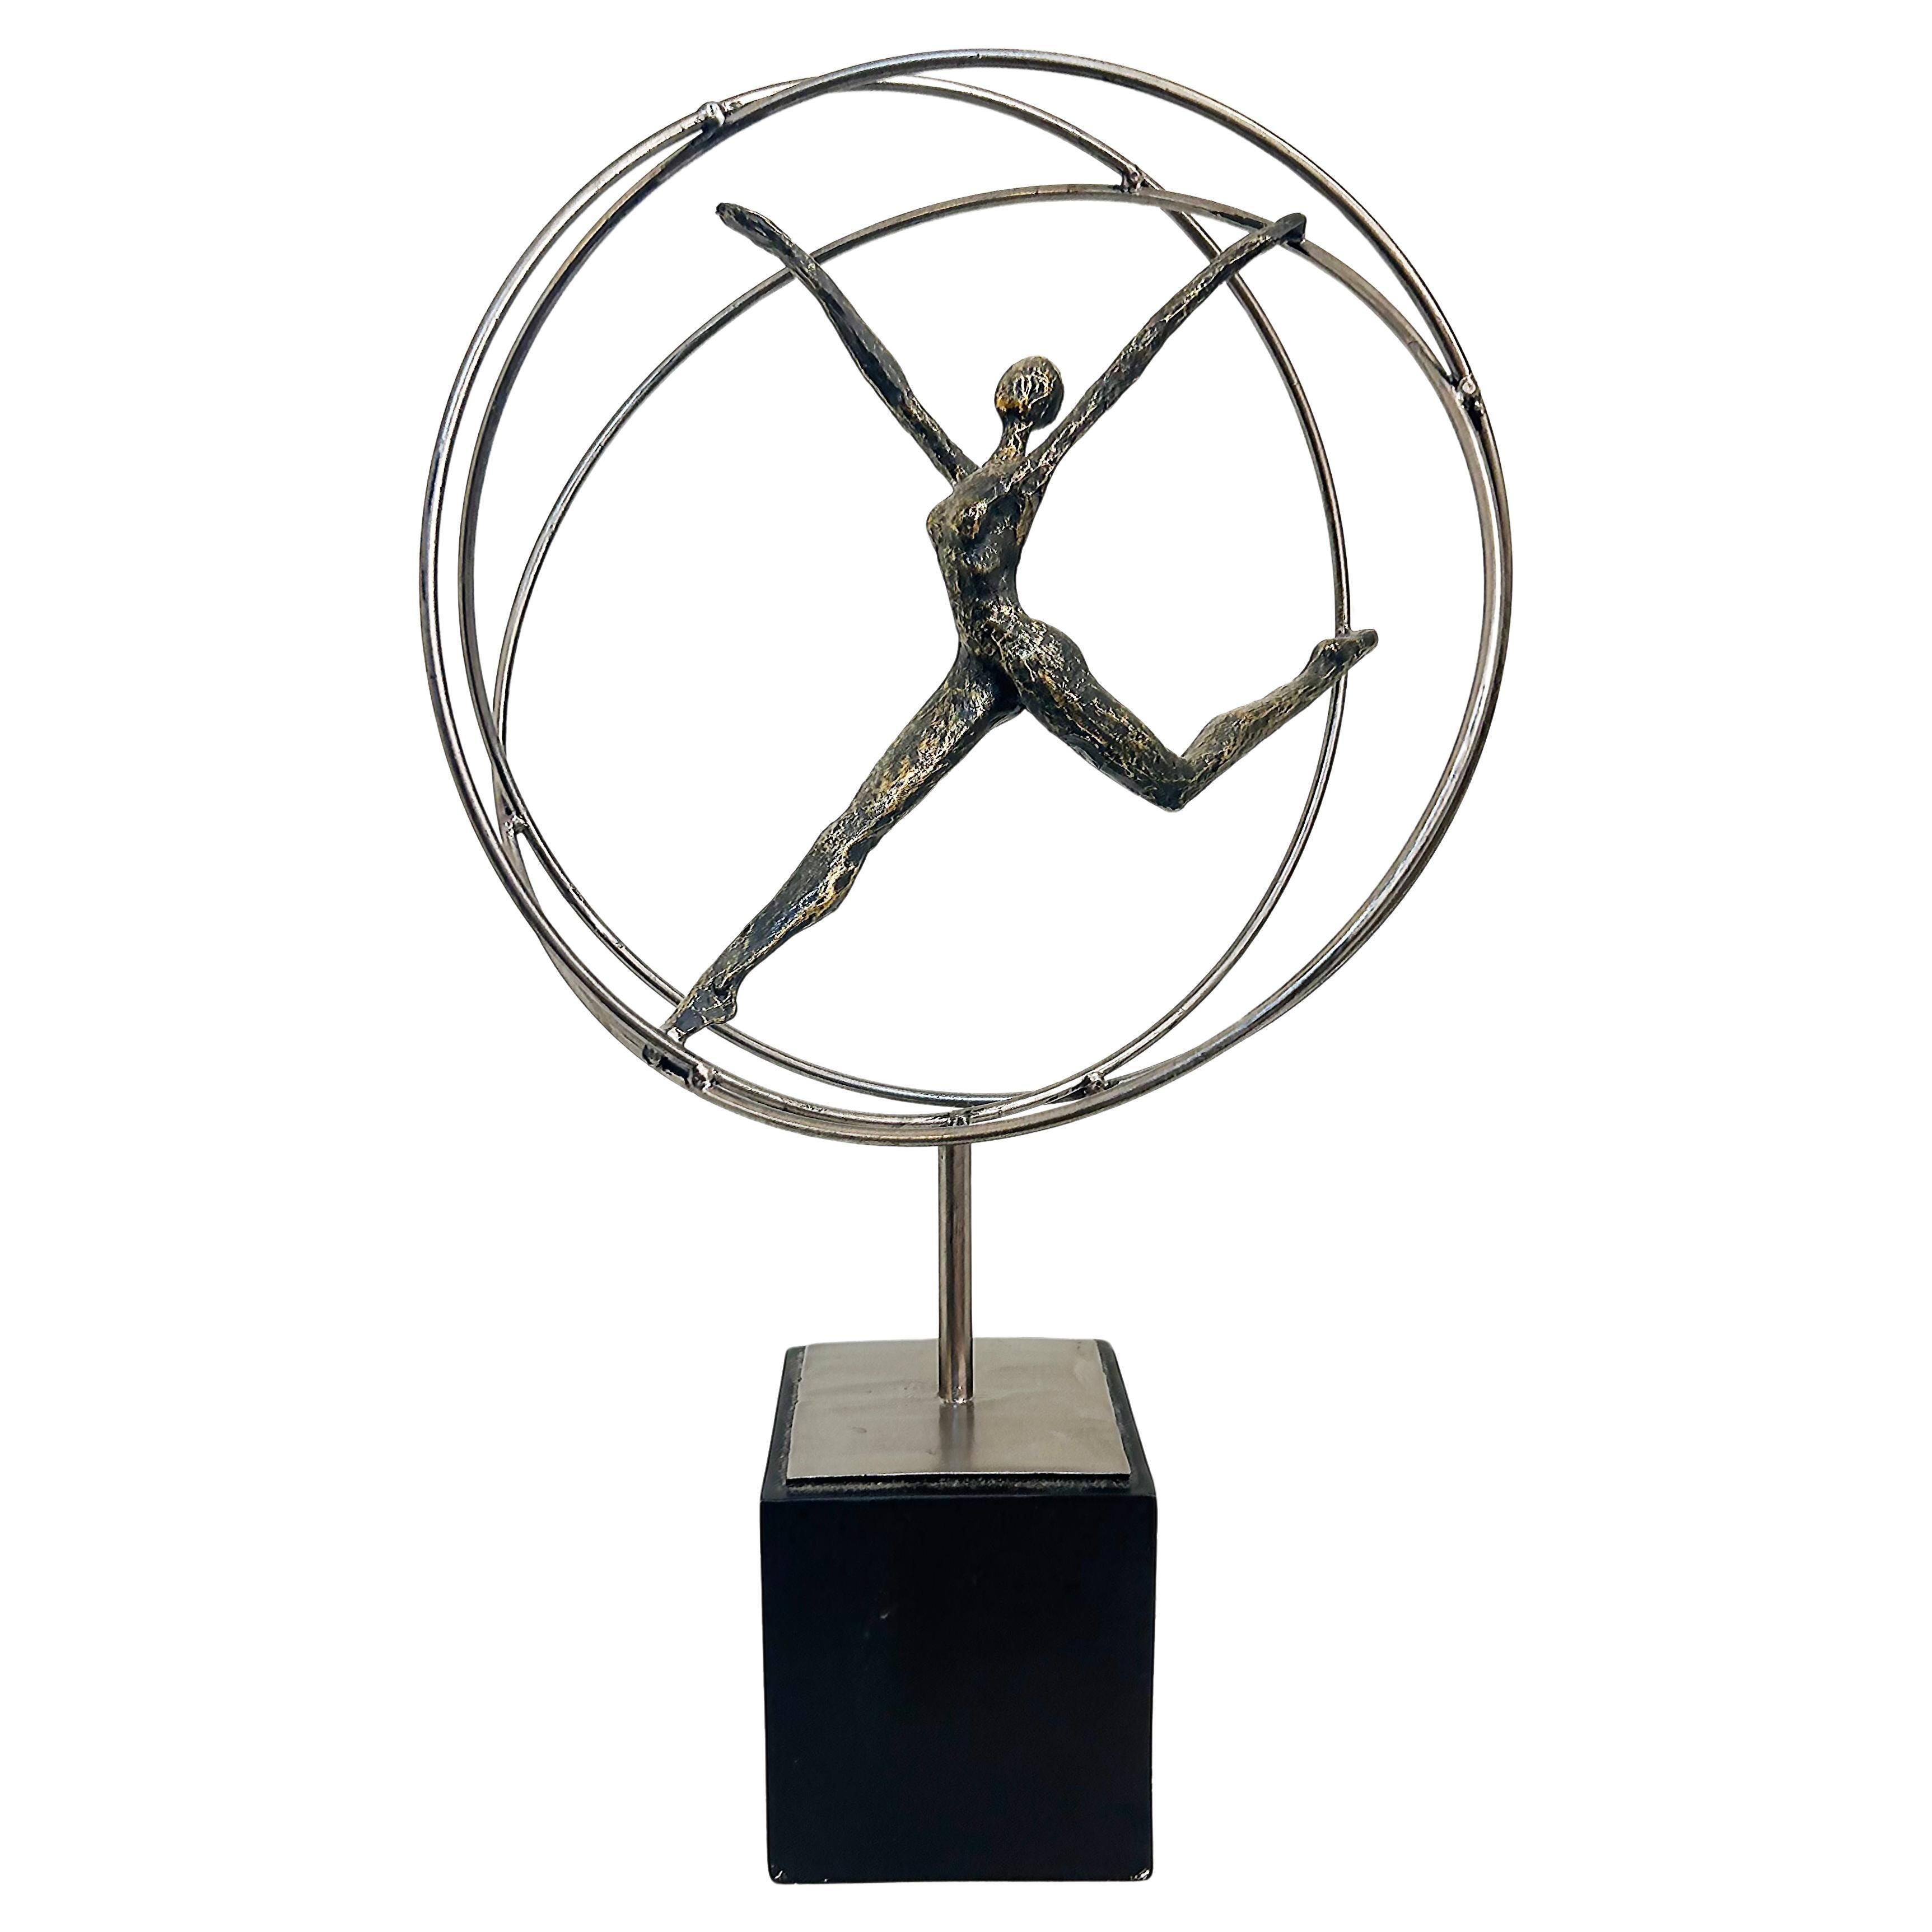 Modern Acrobats on Rings Figurative Metal Sculpture Mounted on Square Base